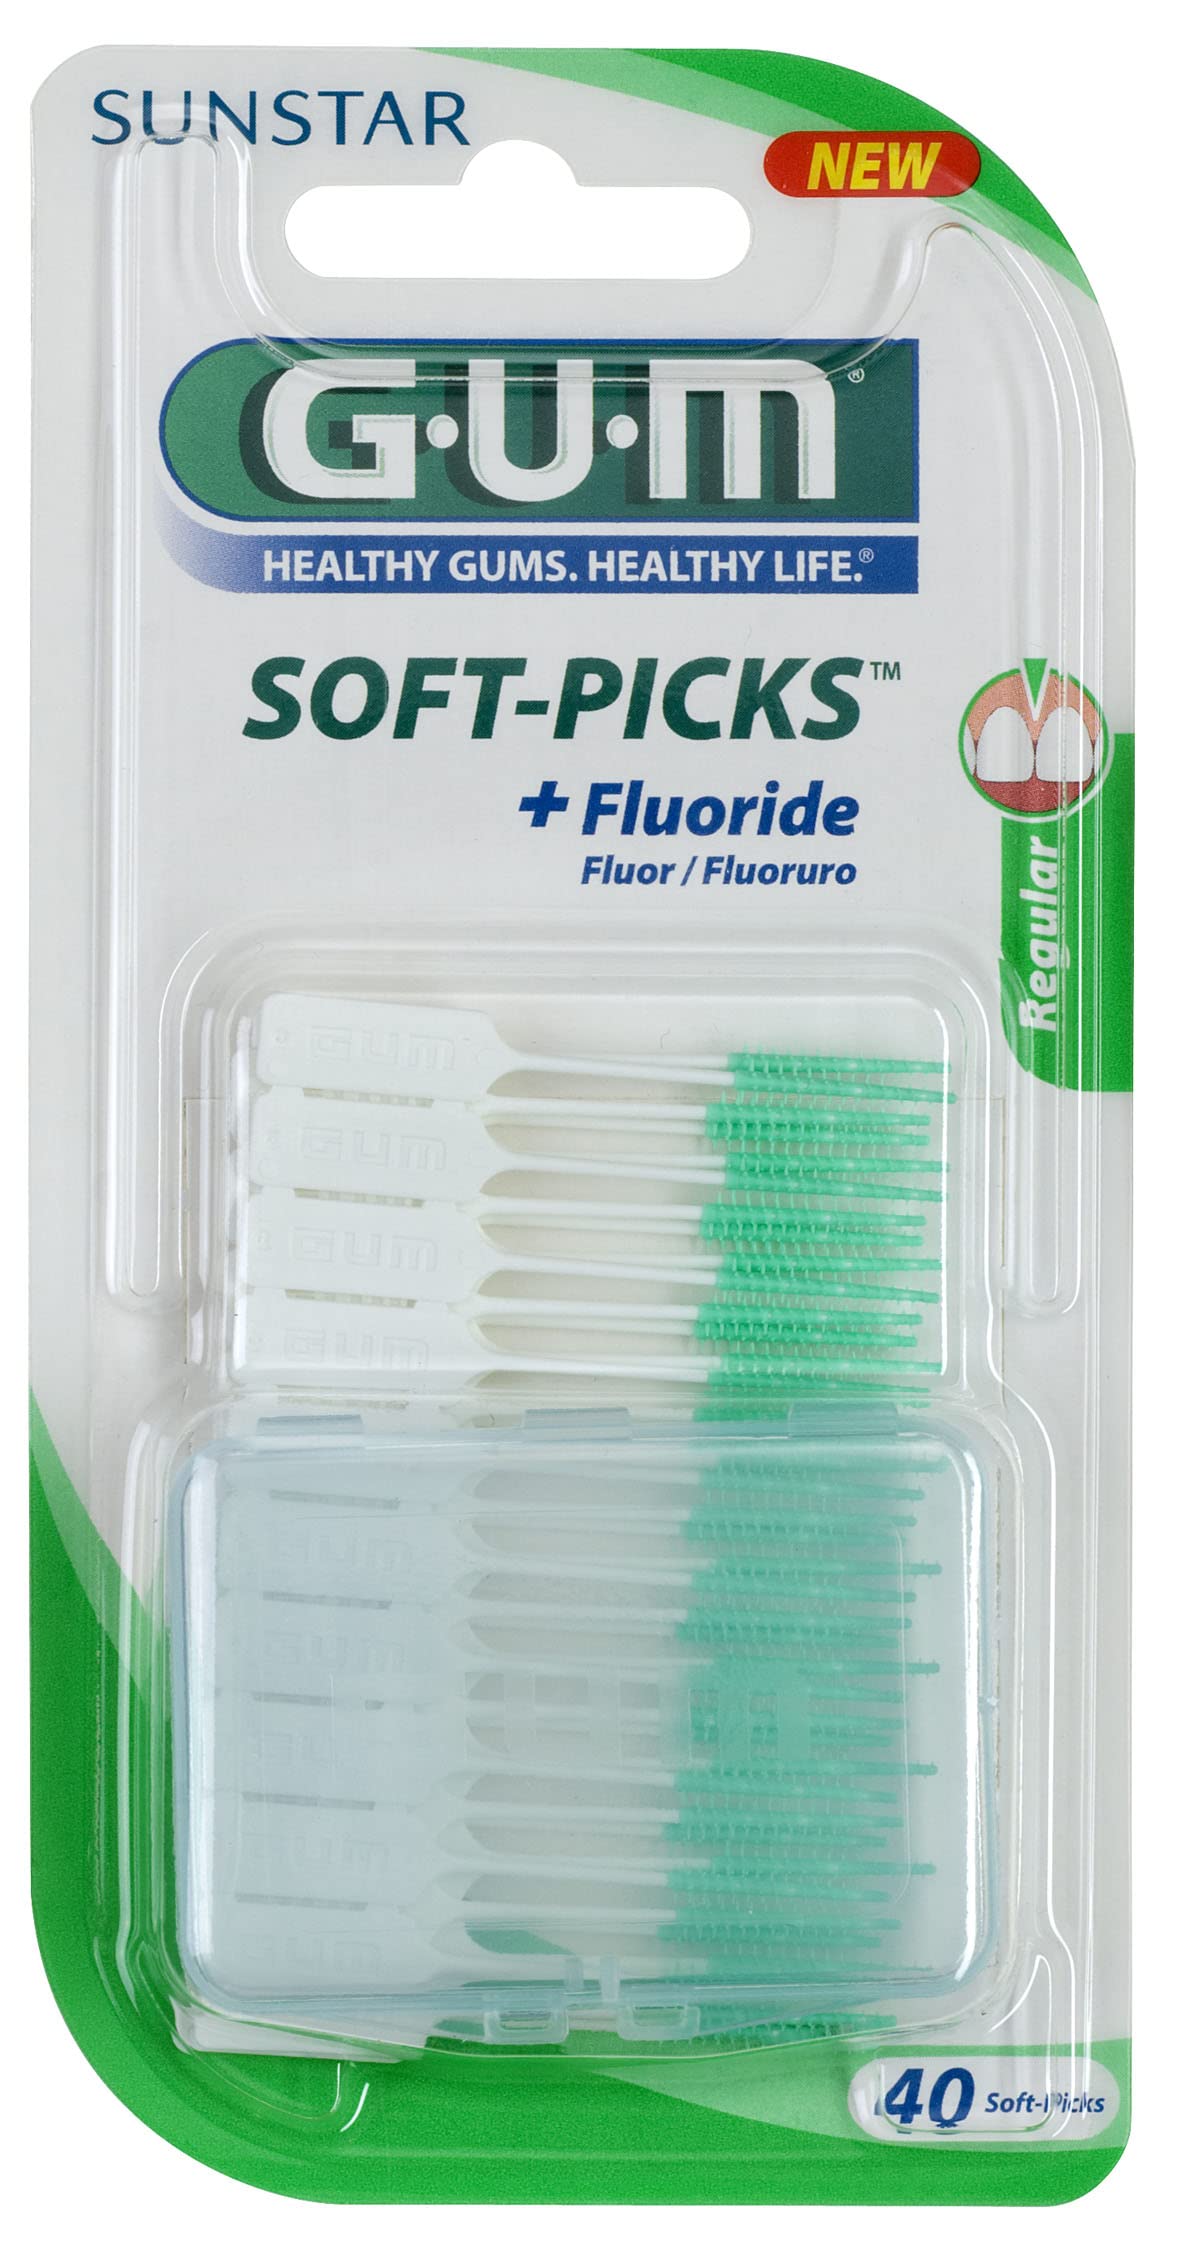 Gum Soft Picks Original - Flexible and soft rubber bristles- With Flouride - Safely Removes Plaque & Food Particles |Interdental Brushes | Pack of 40- Regular